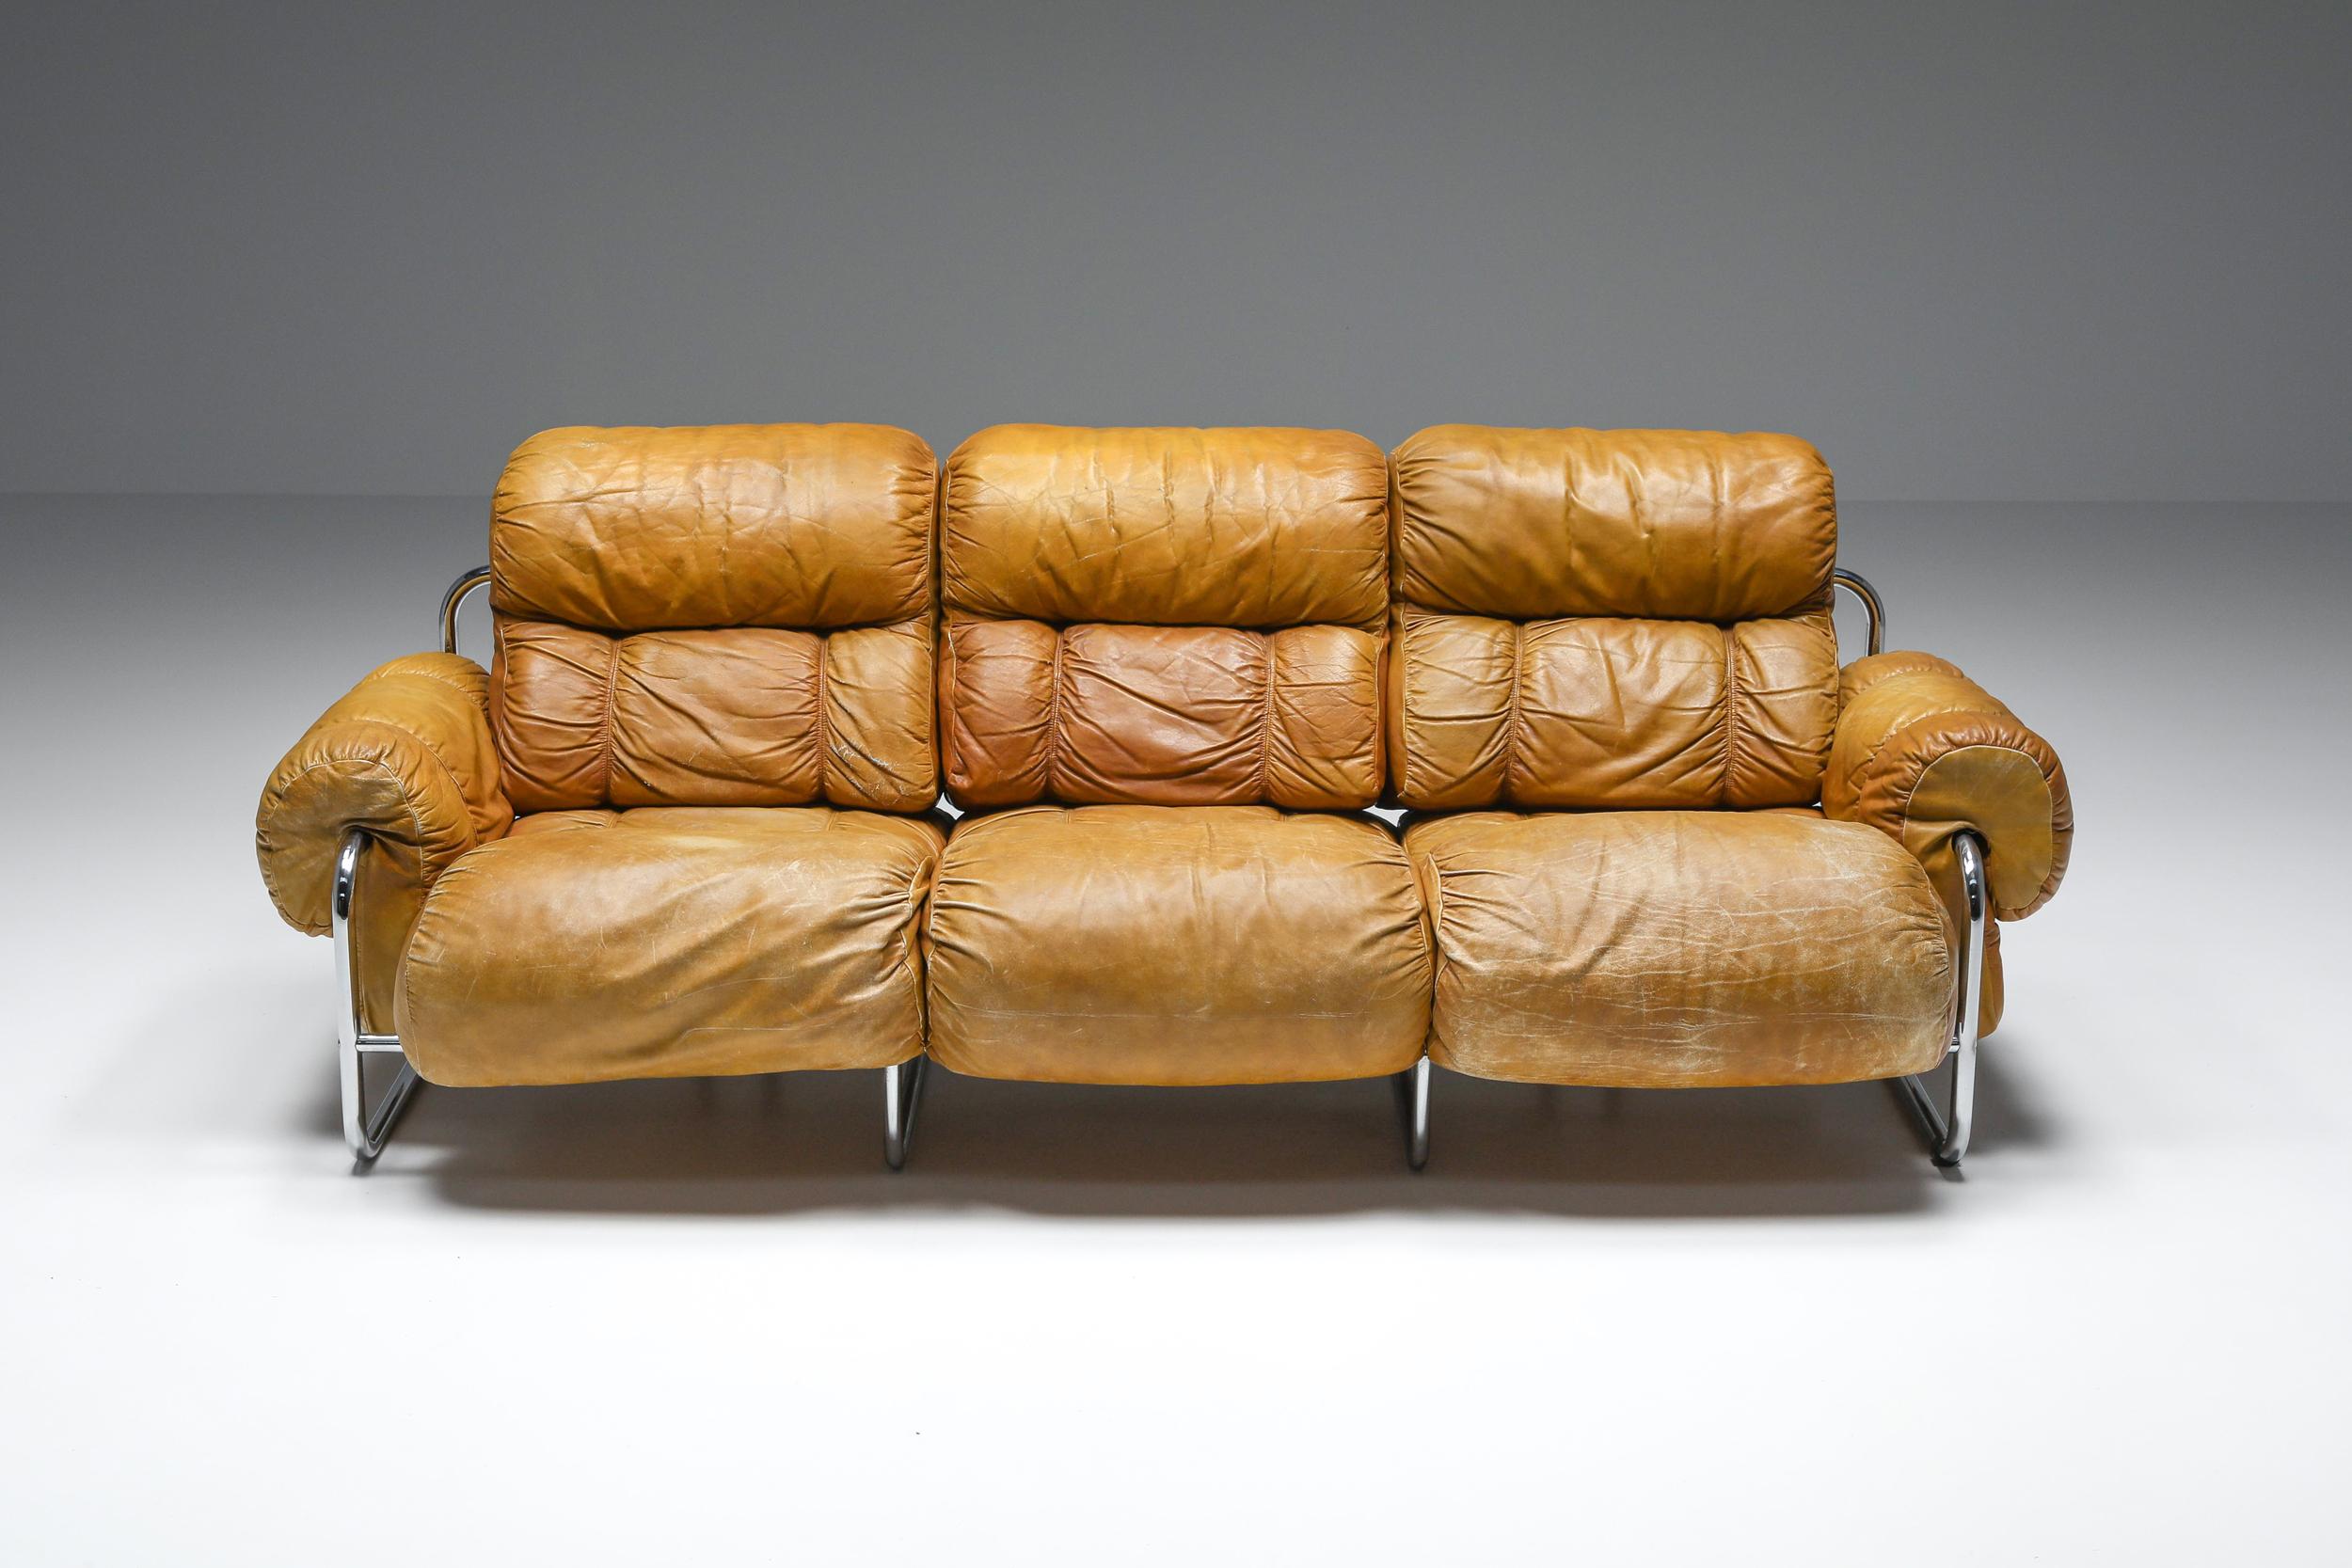 Guido Faleschini, Tucroma Three Seater Sofa Set for Pace Collection; Italian design, 1975

Rare sofa of the Tucroma series in leather and chrome metal. Icon piece from the 70s produced by Mariani
Elegant piece embodying the best Italian design